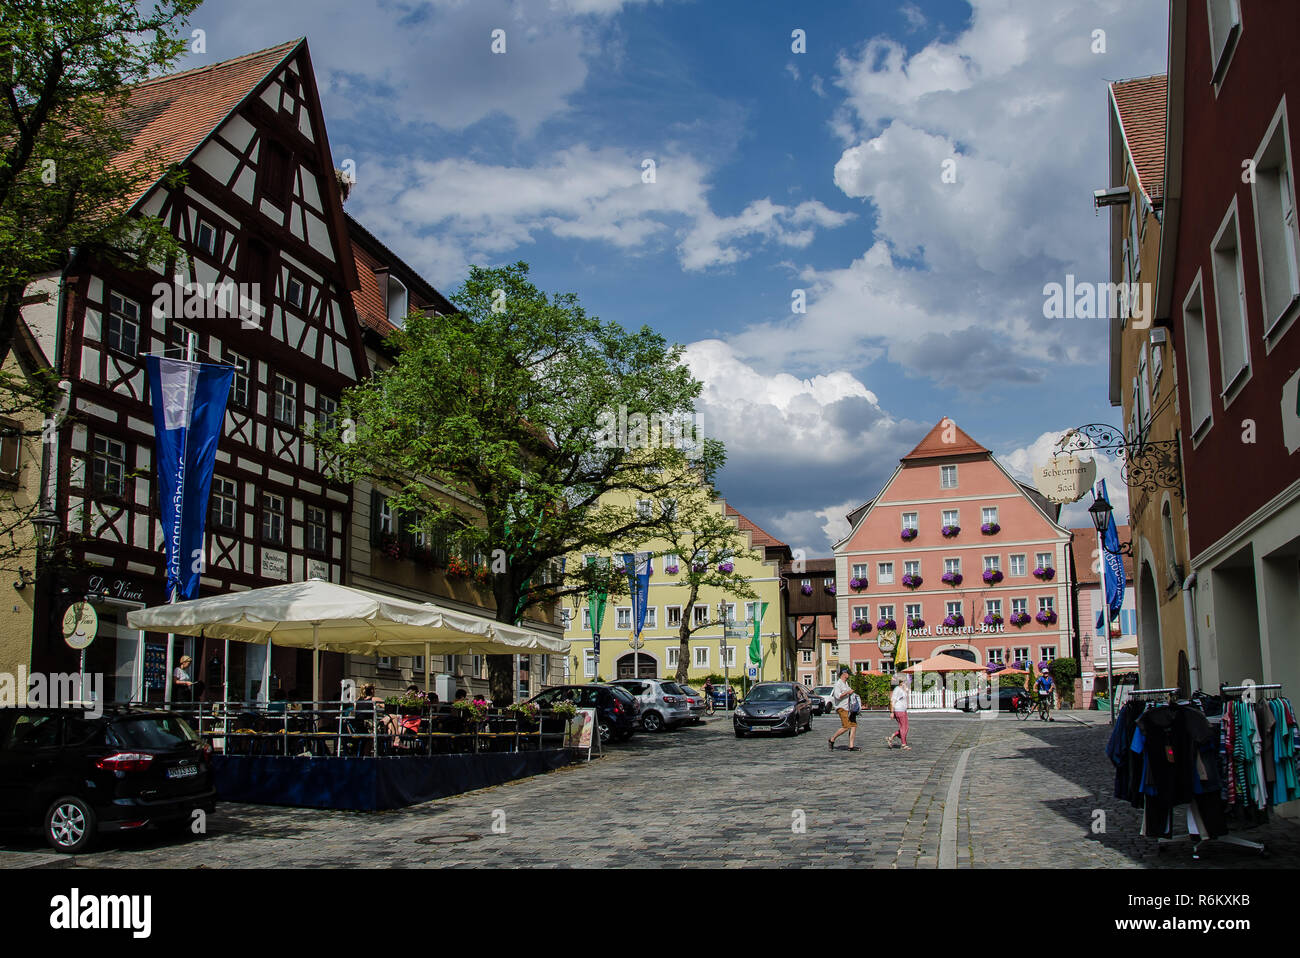 Feuchtwangen is a city in Ansbach district in the administrative region of Middle Franconia in Bavaria, Germany. Stock Photo